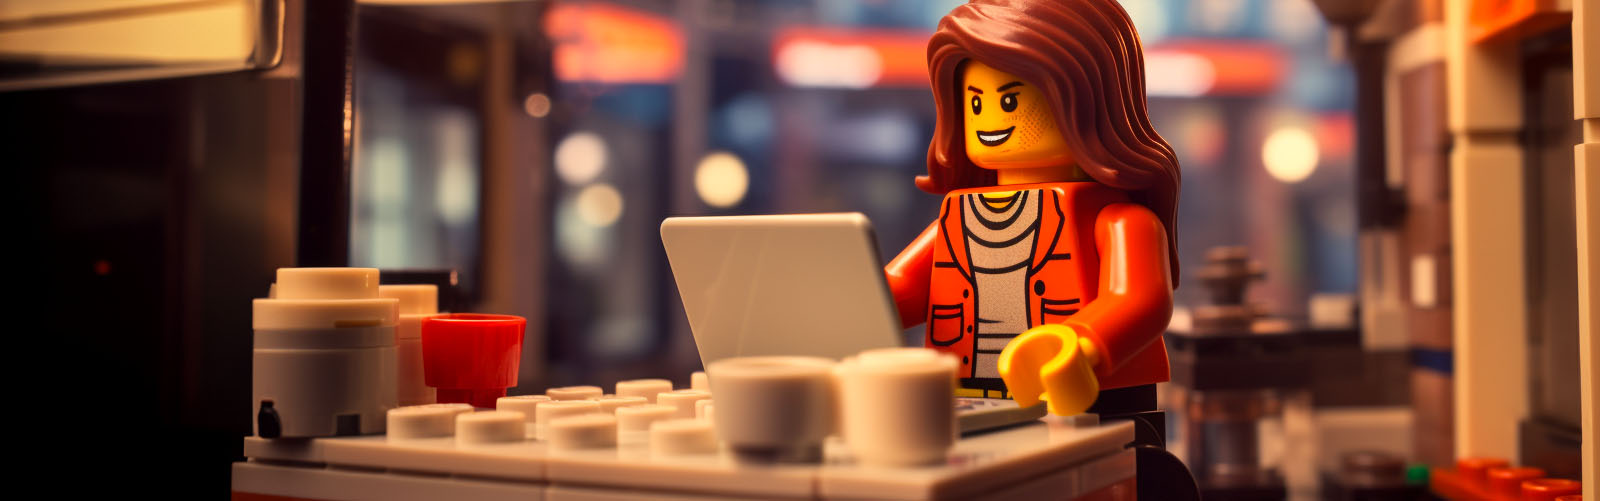 Lego character using a laptop in a coffee shop enabled with WiFi 7